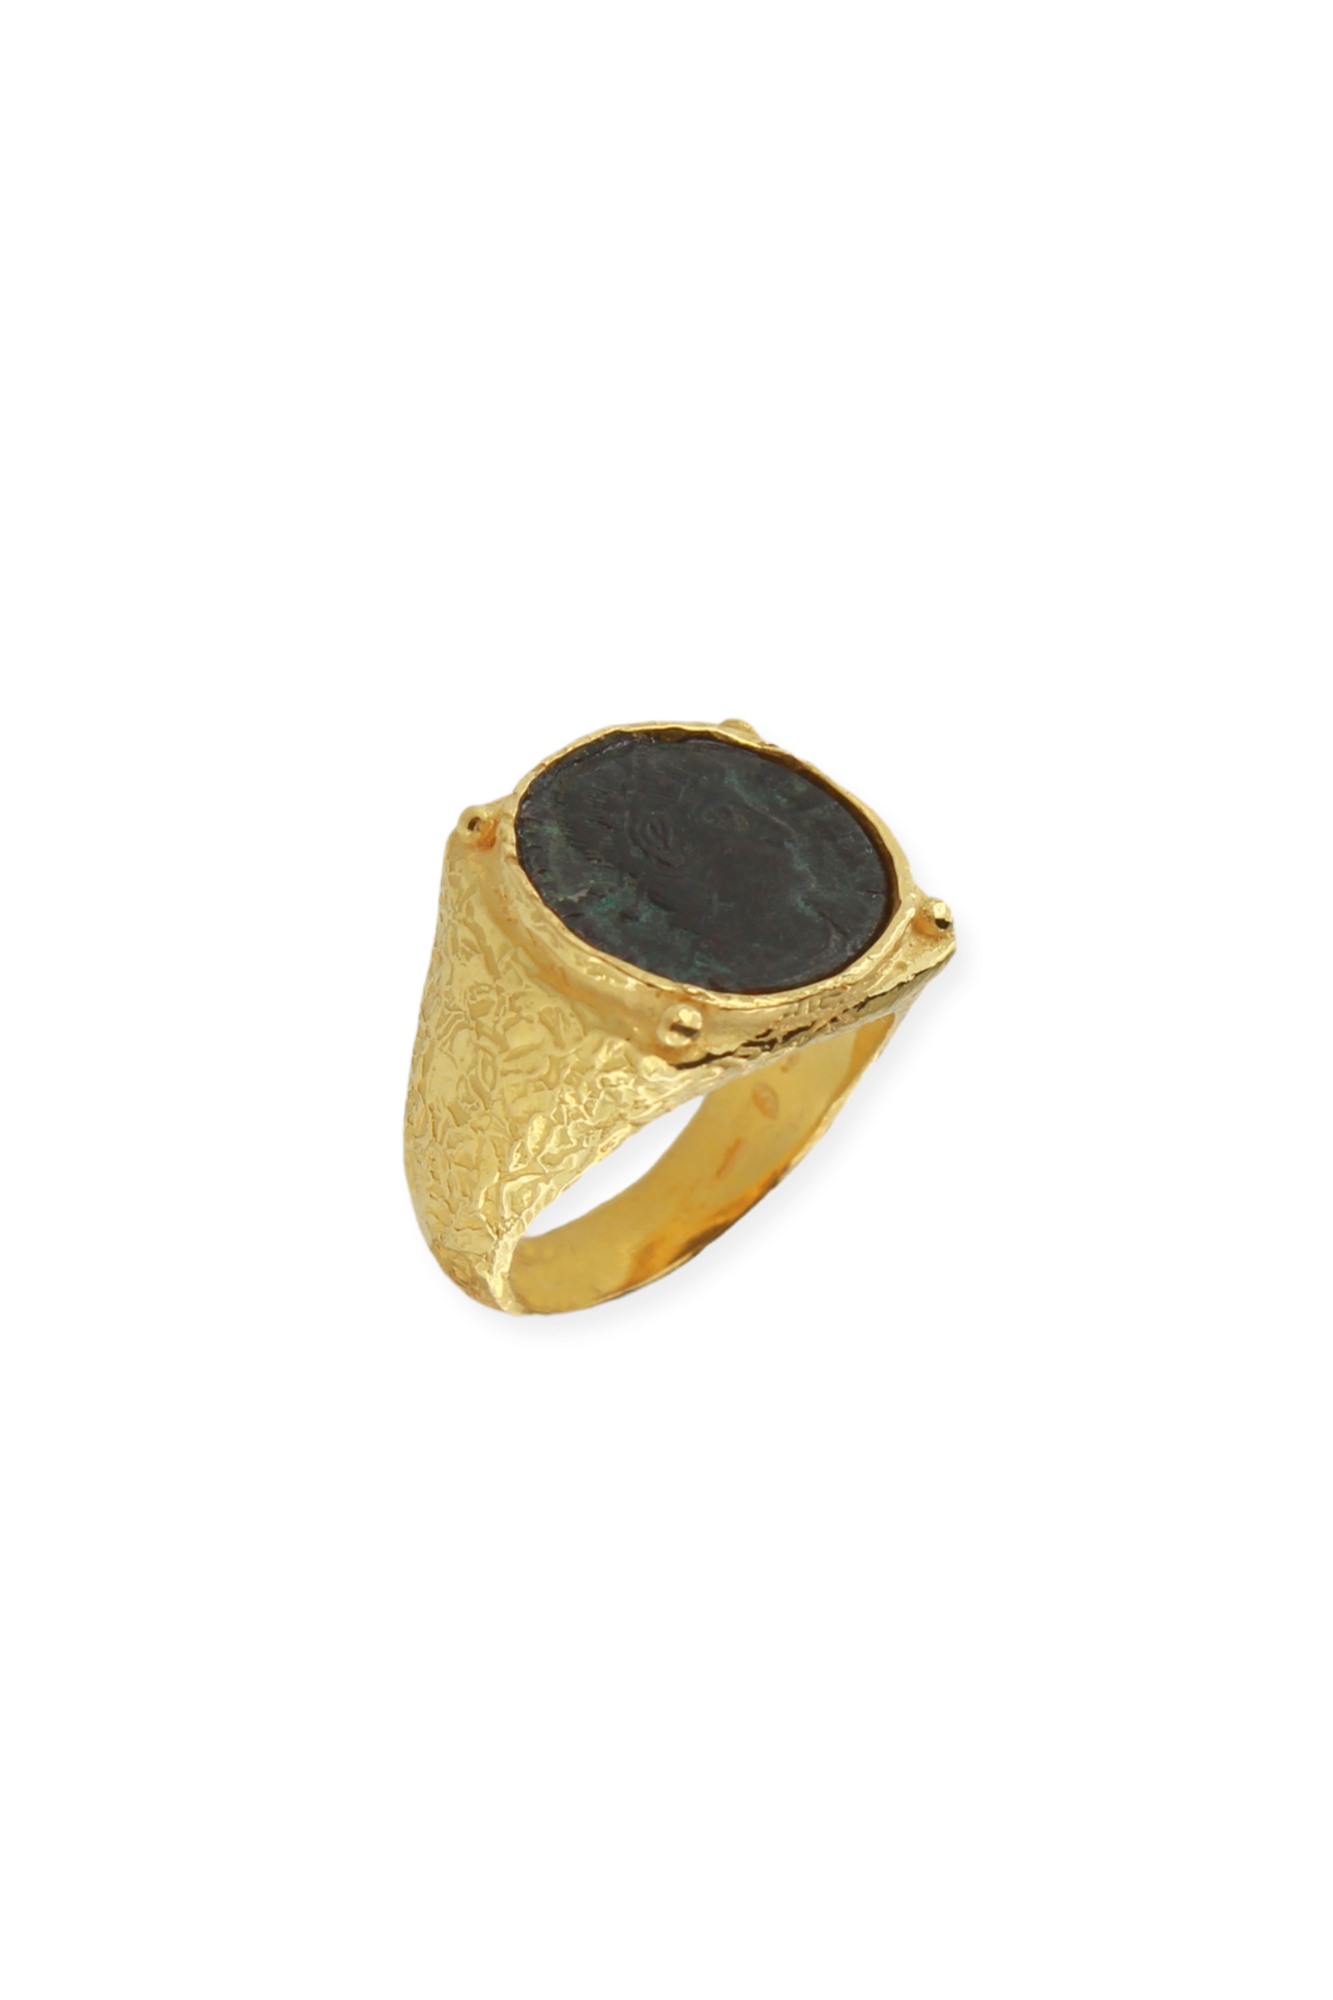 SE652-18-Kt-Yellow-Gold-Signet-Ring-with-Roman-Coin-1